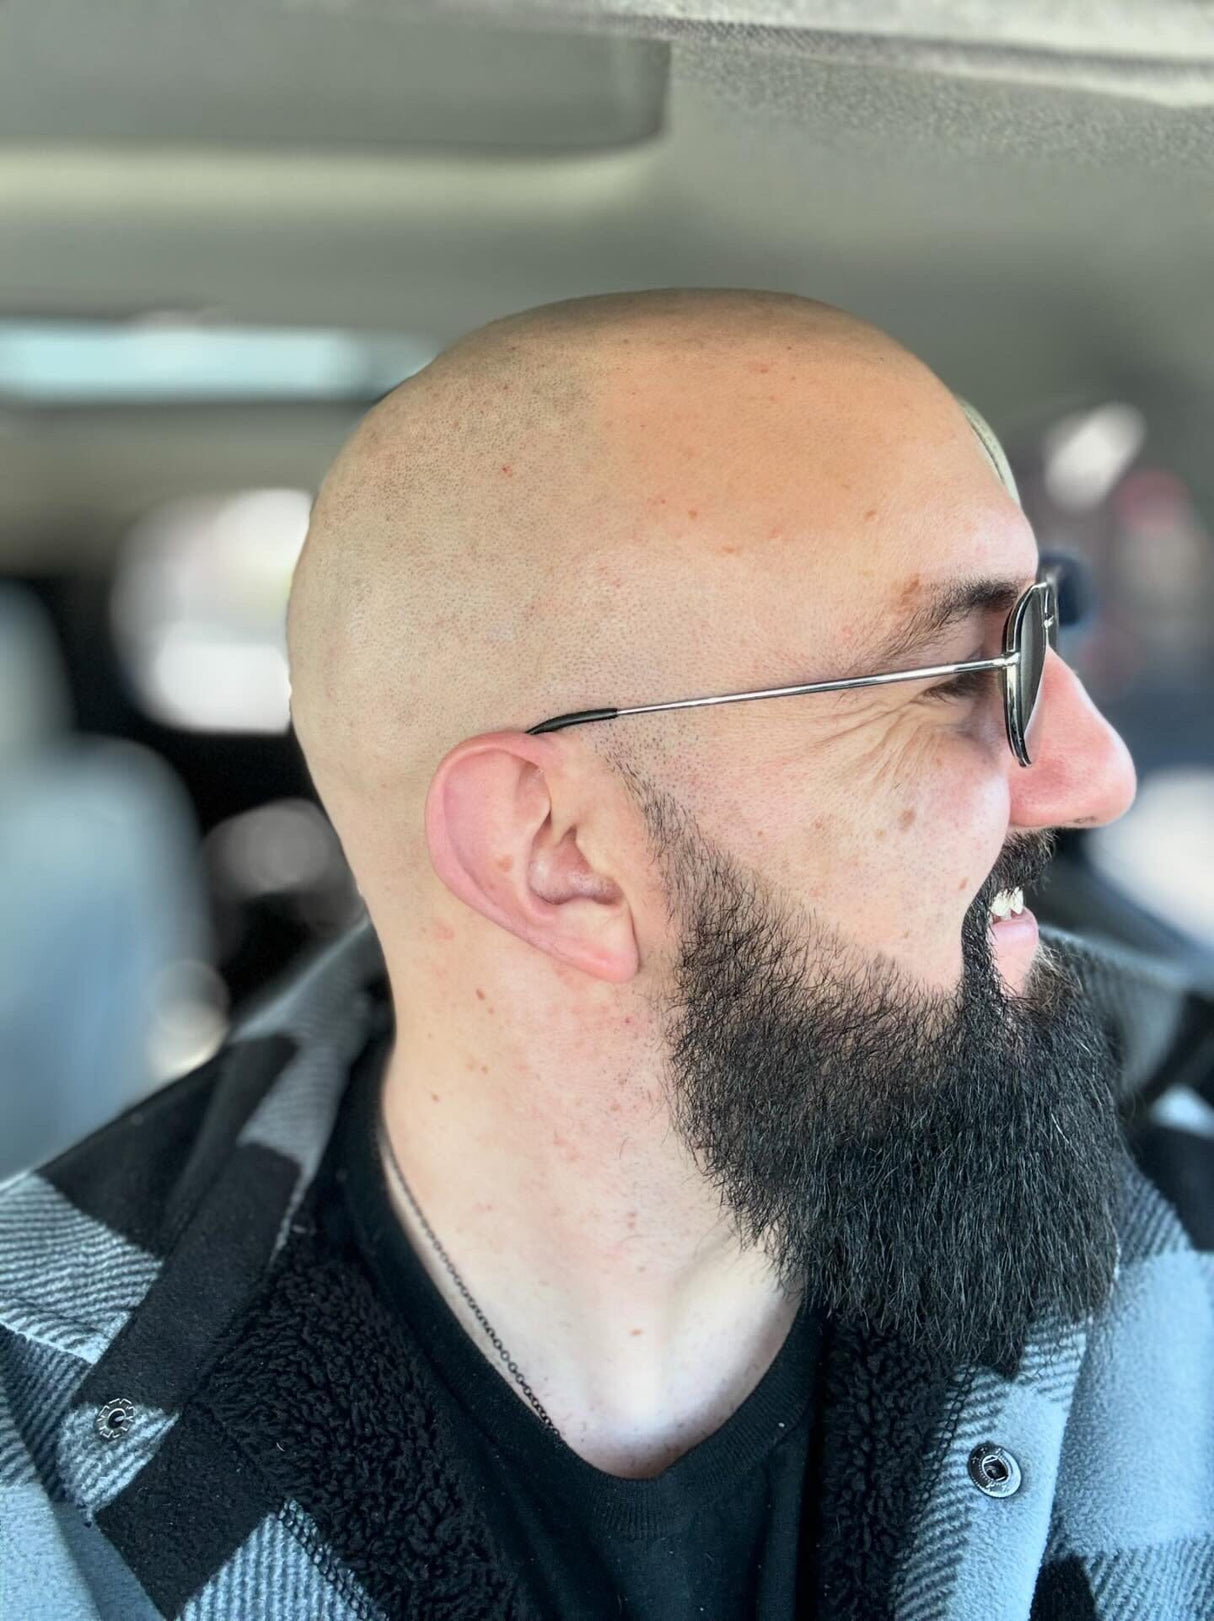 A side profile of a man with a Mountaineer Brand Products' Complete Bald Head Care System-treated head and a full beard wearing eyeglasses and a plaid shirt.